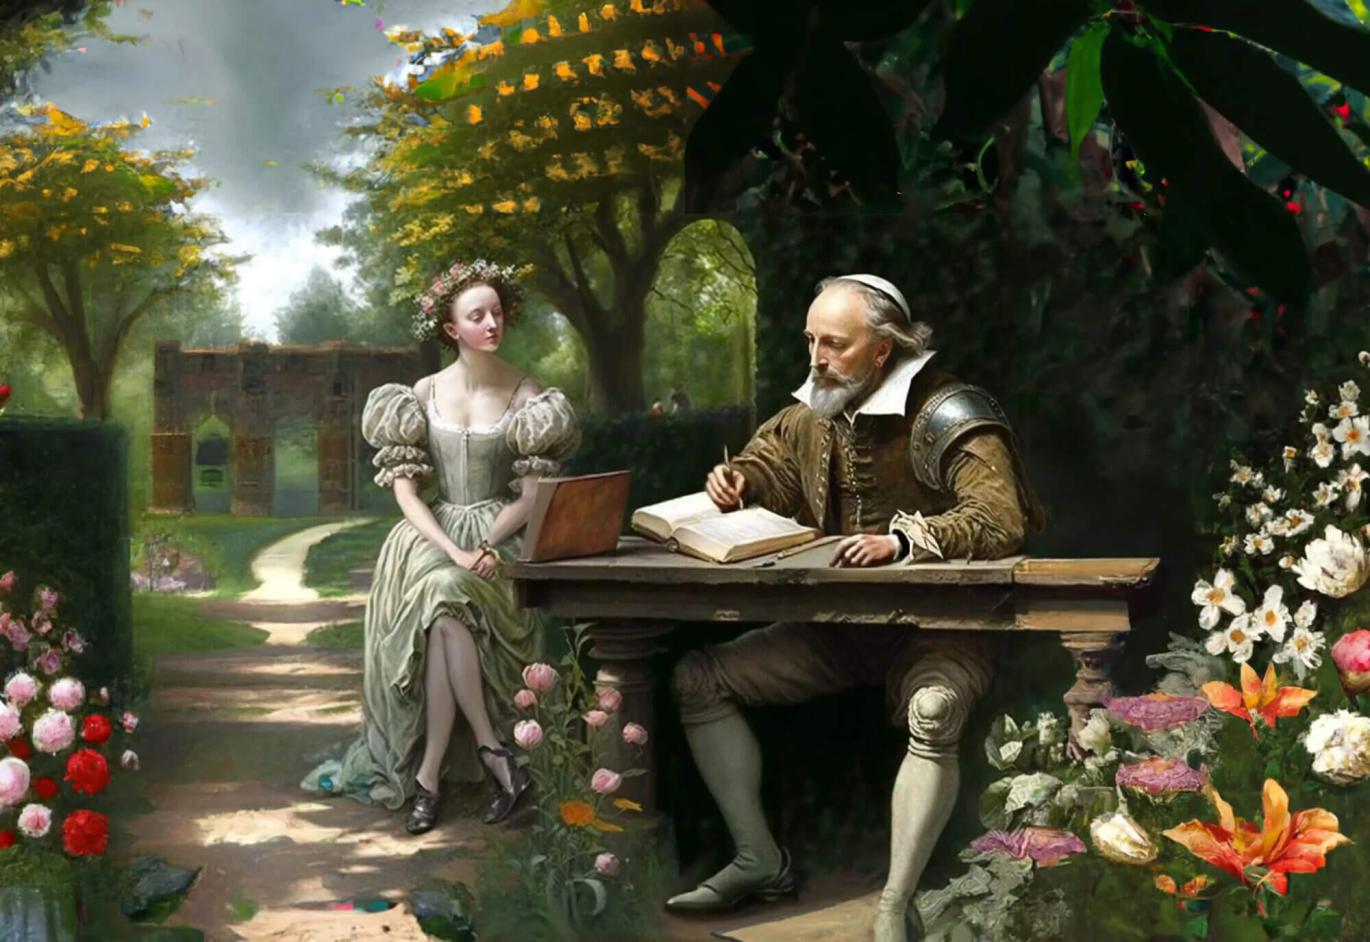 How Do Shakespeare's Sonnets Explore Themes Of Love, Beauty, And Mortality?